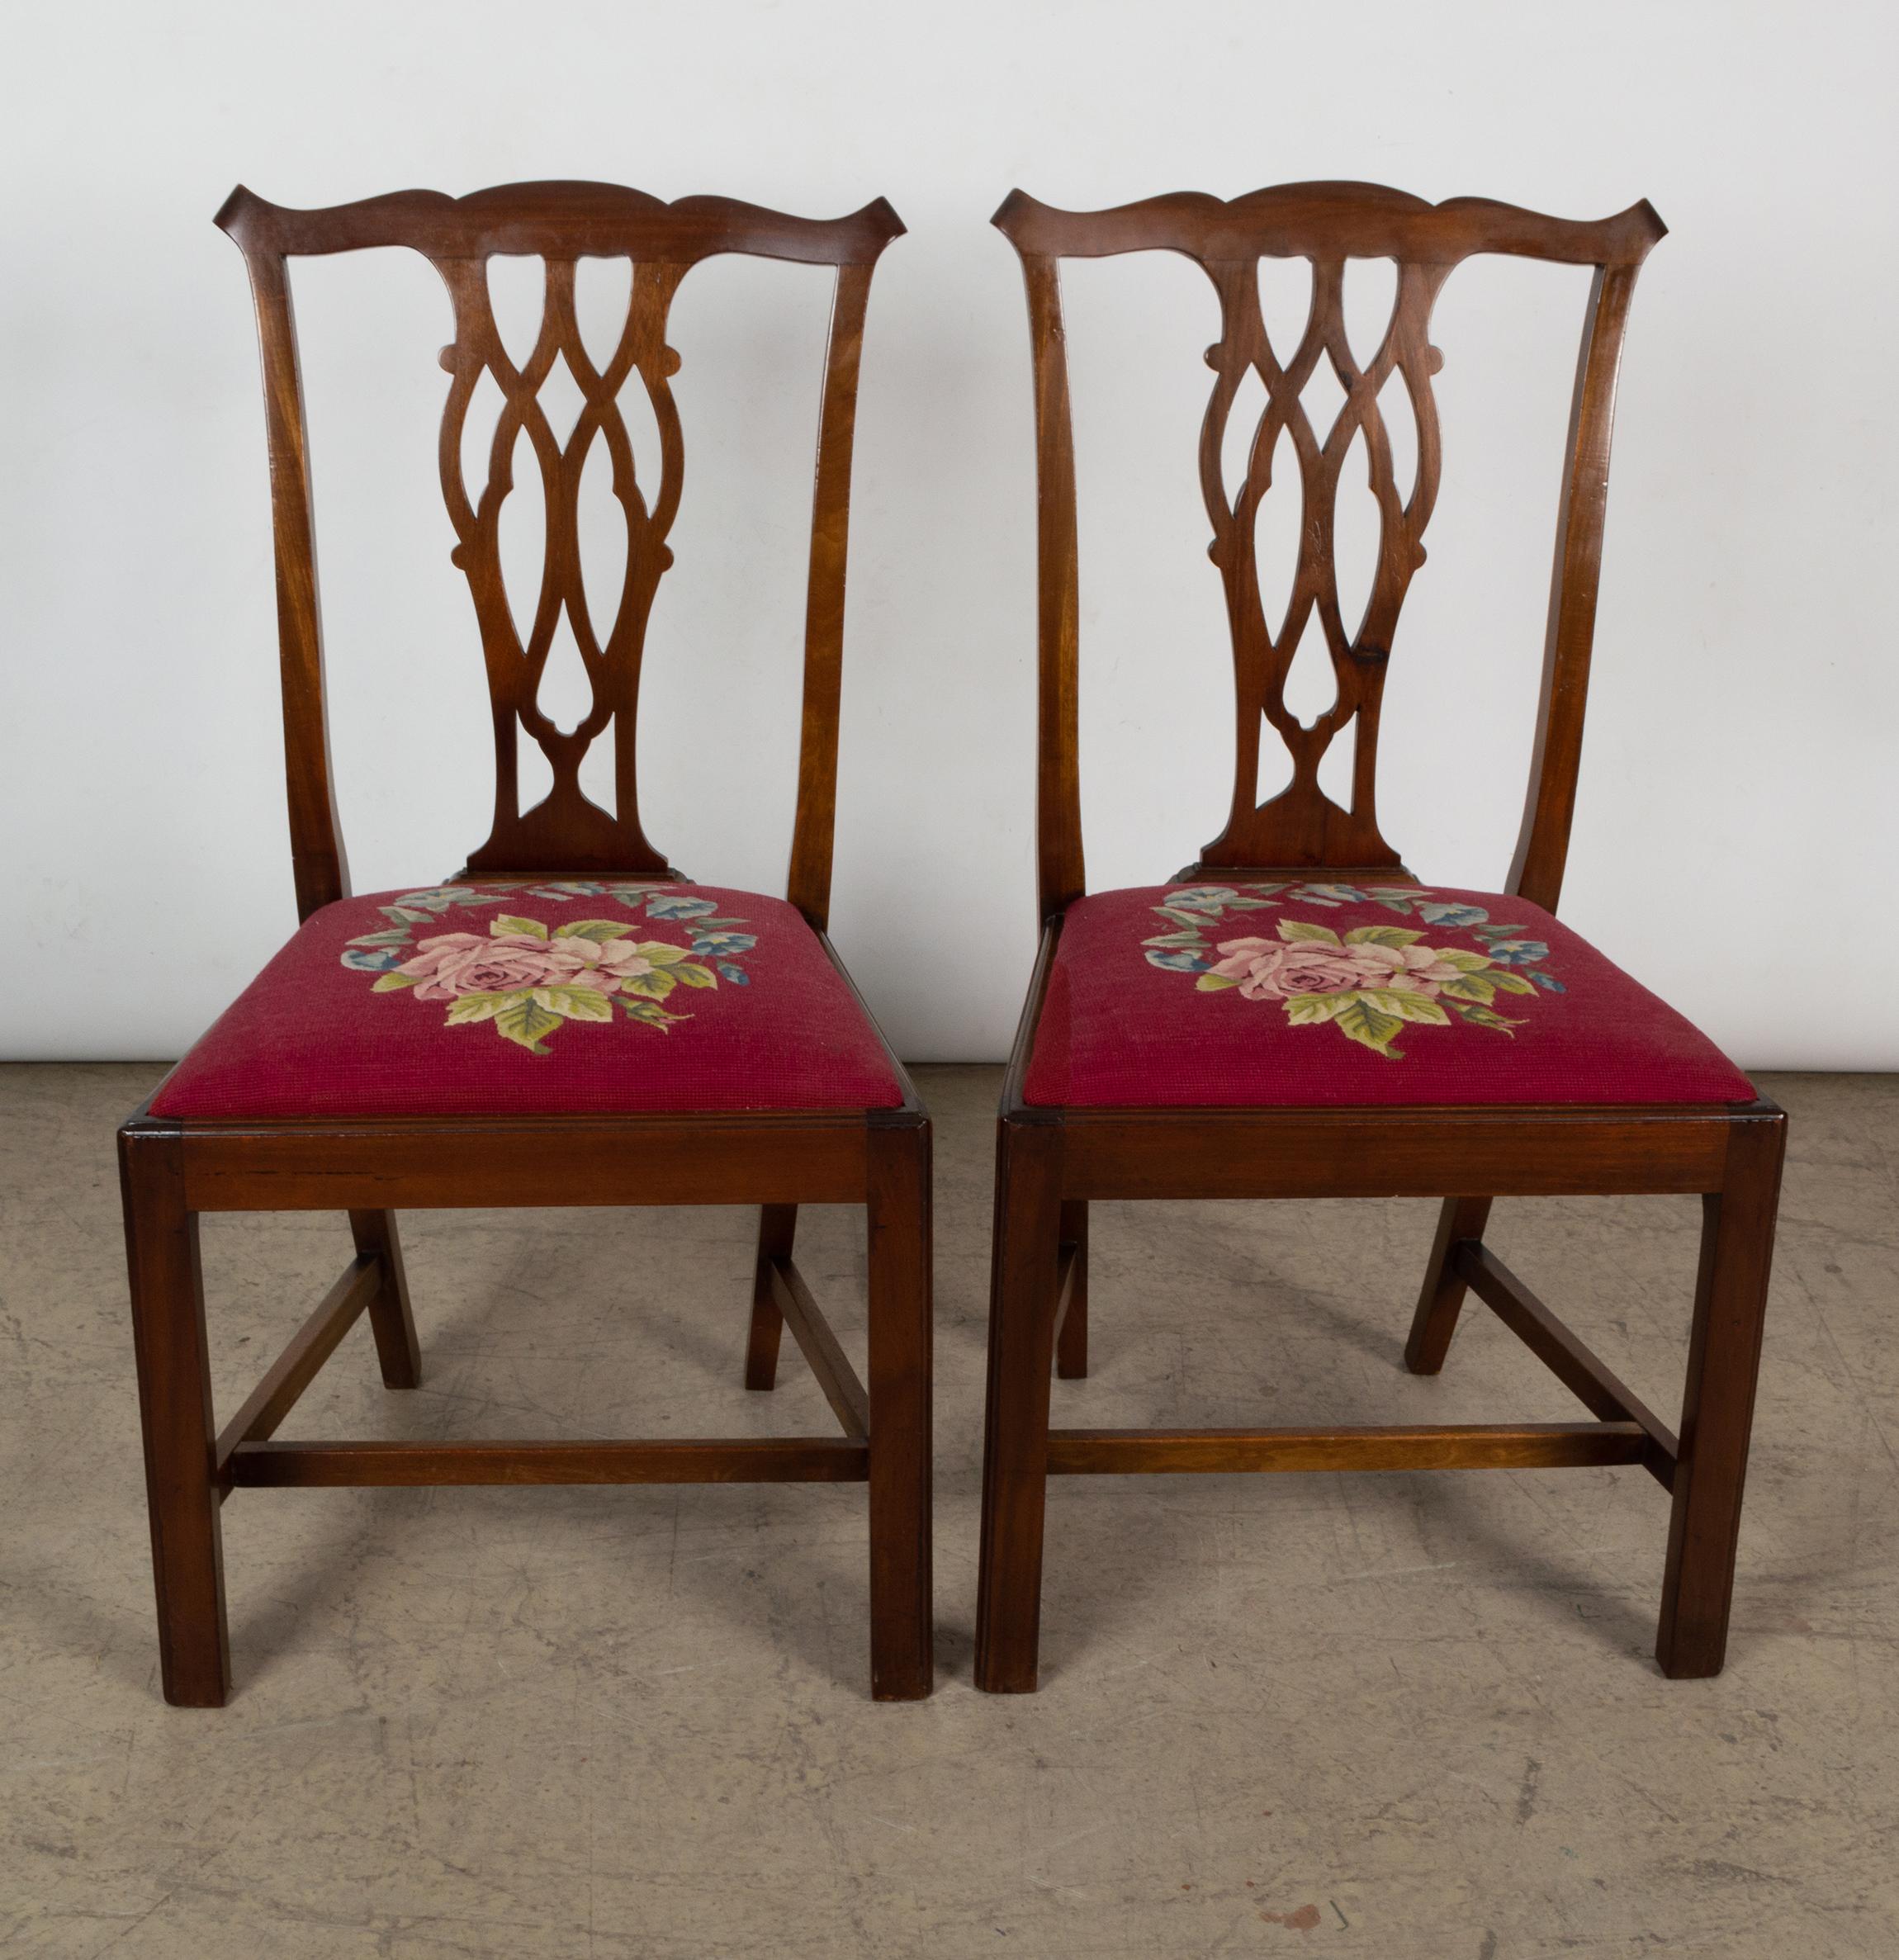 6 Antique English Victorian Chippendale Revival Mahogany Dining Chairs For Sale 10